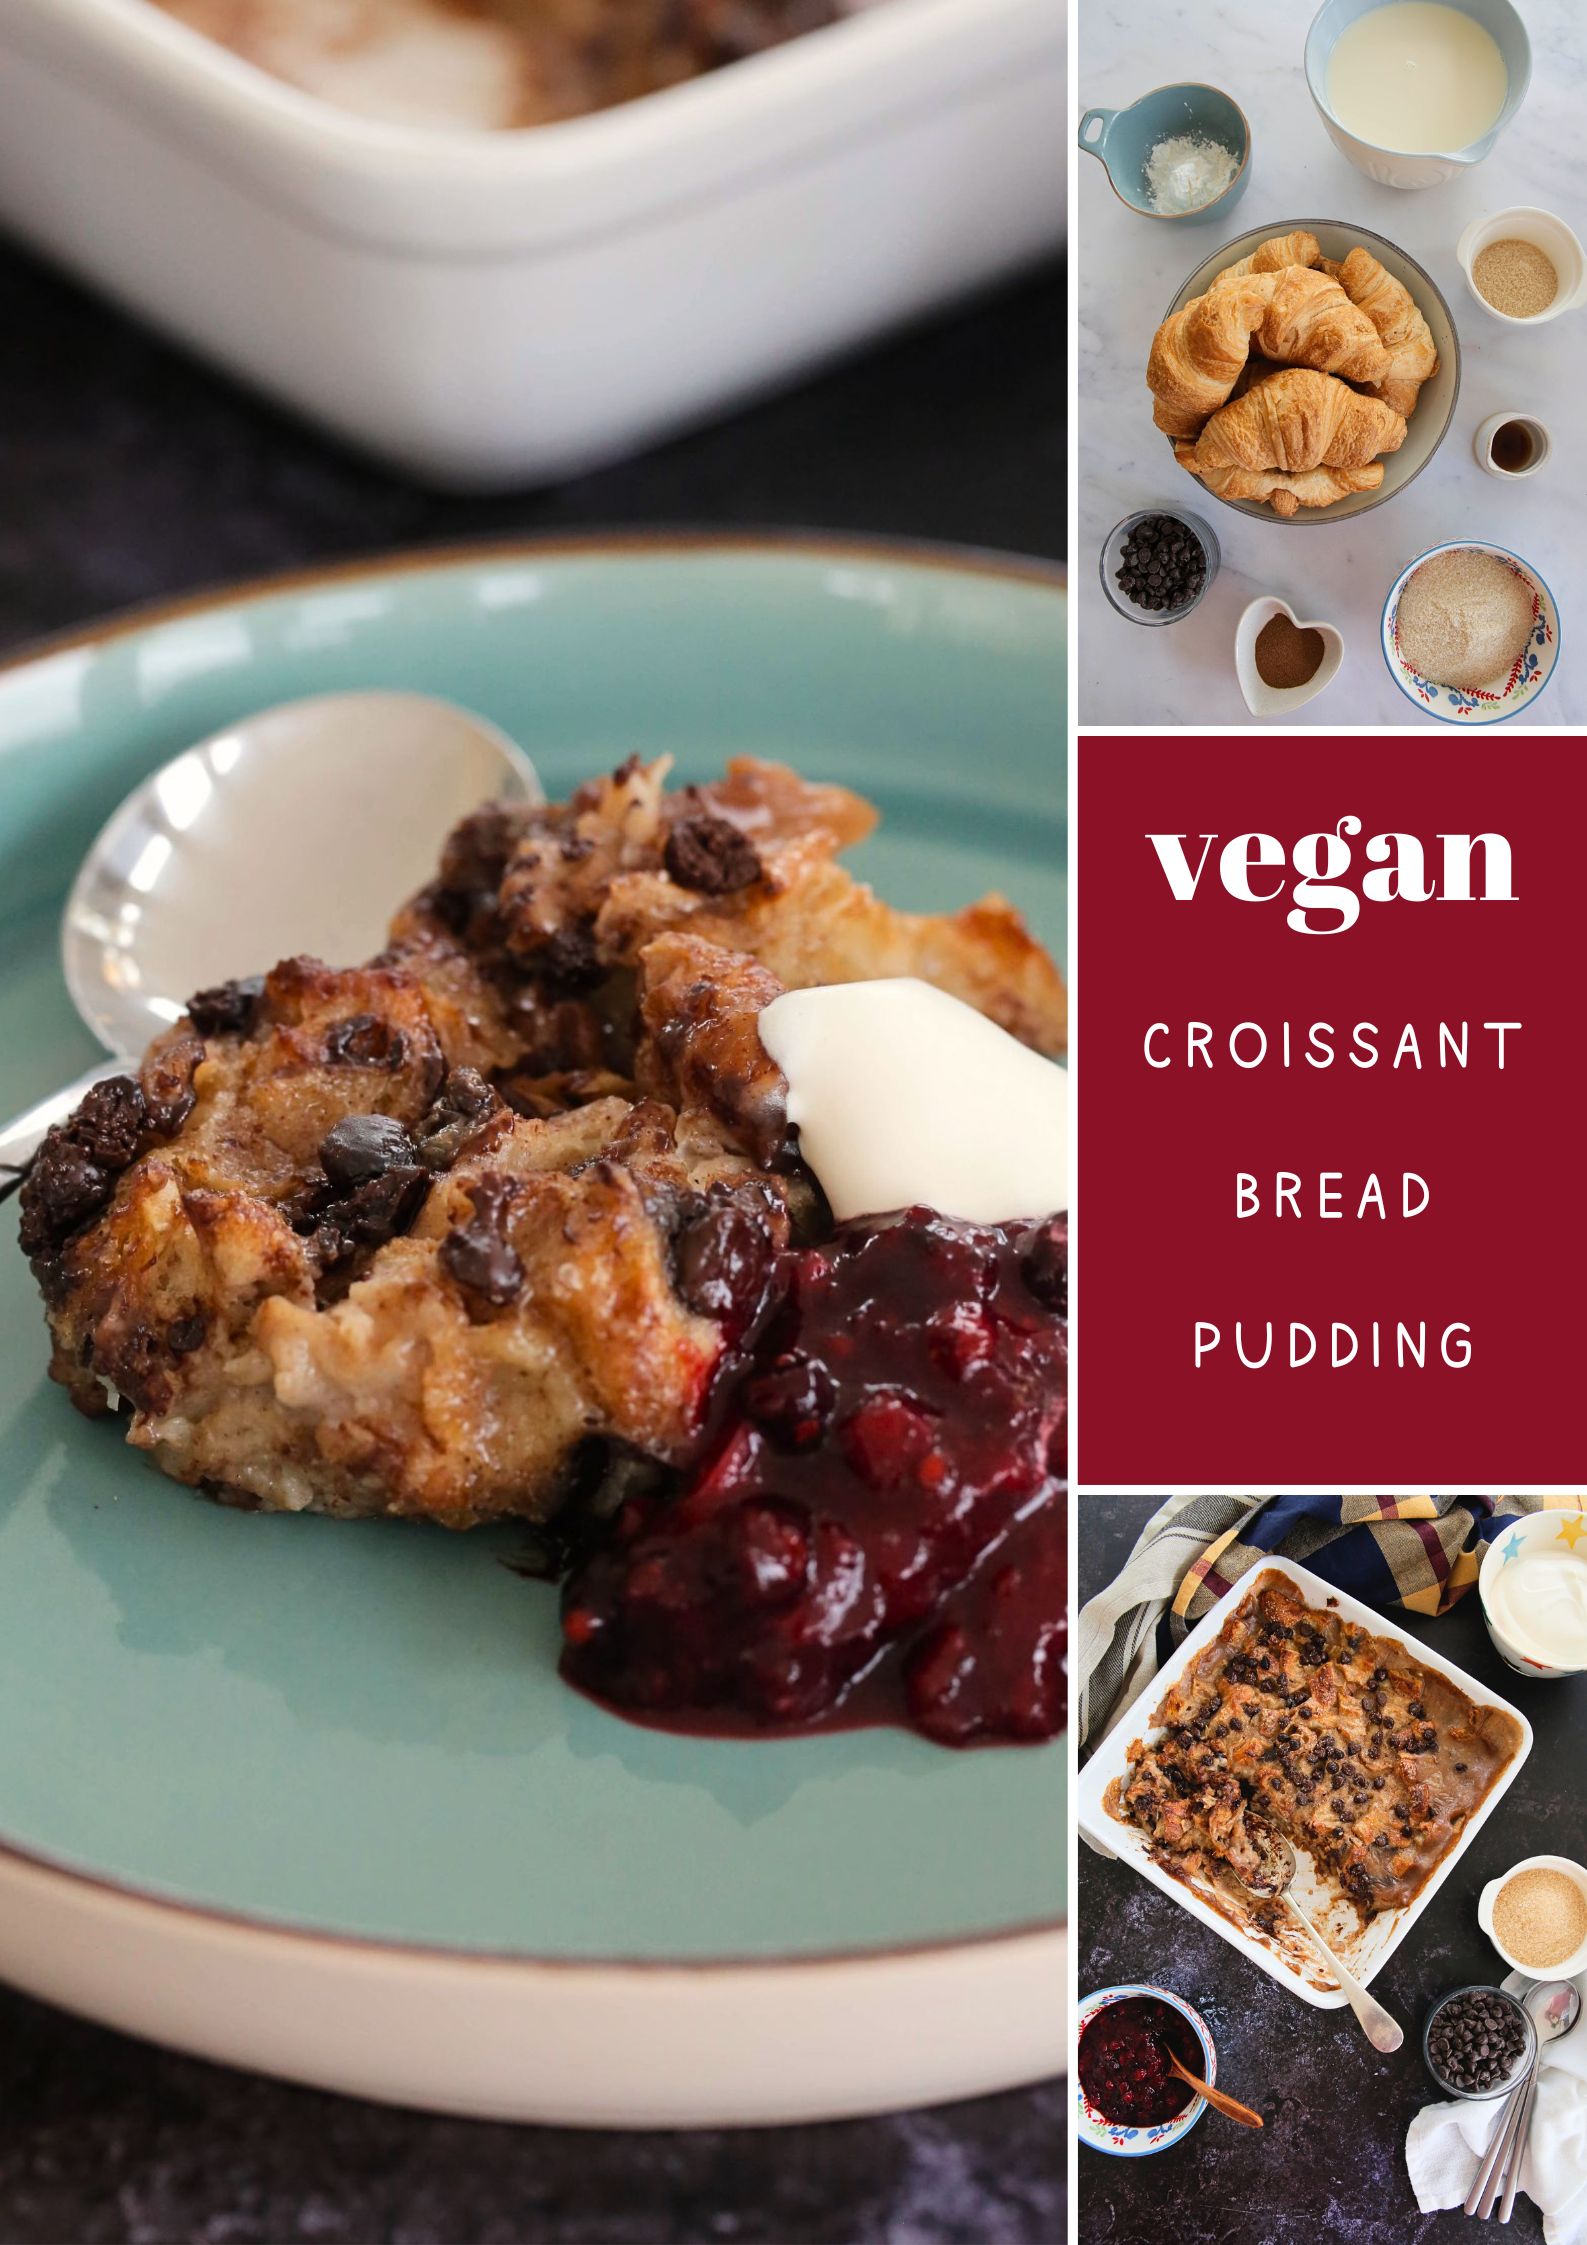 Homemade vegan croissant bread pudding is sweet, rich and custardy and studded with dark chocolate chips. Make ahead and serve with a warm berry compote and whipped cream for a special occasion dessert. Recipe on thecookandhim.com | #croissantbreadpudding #vegandessert #veganpudding #veganbaking